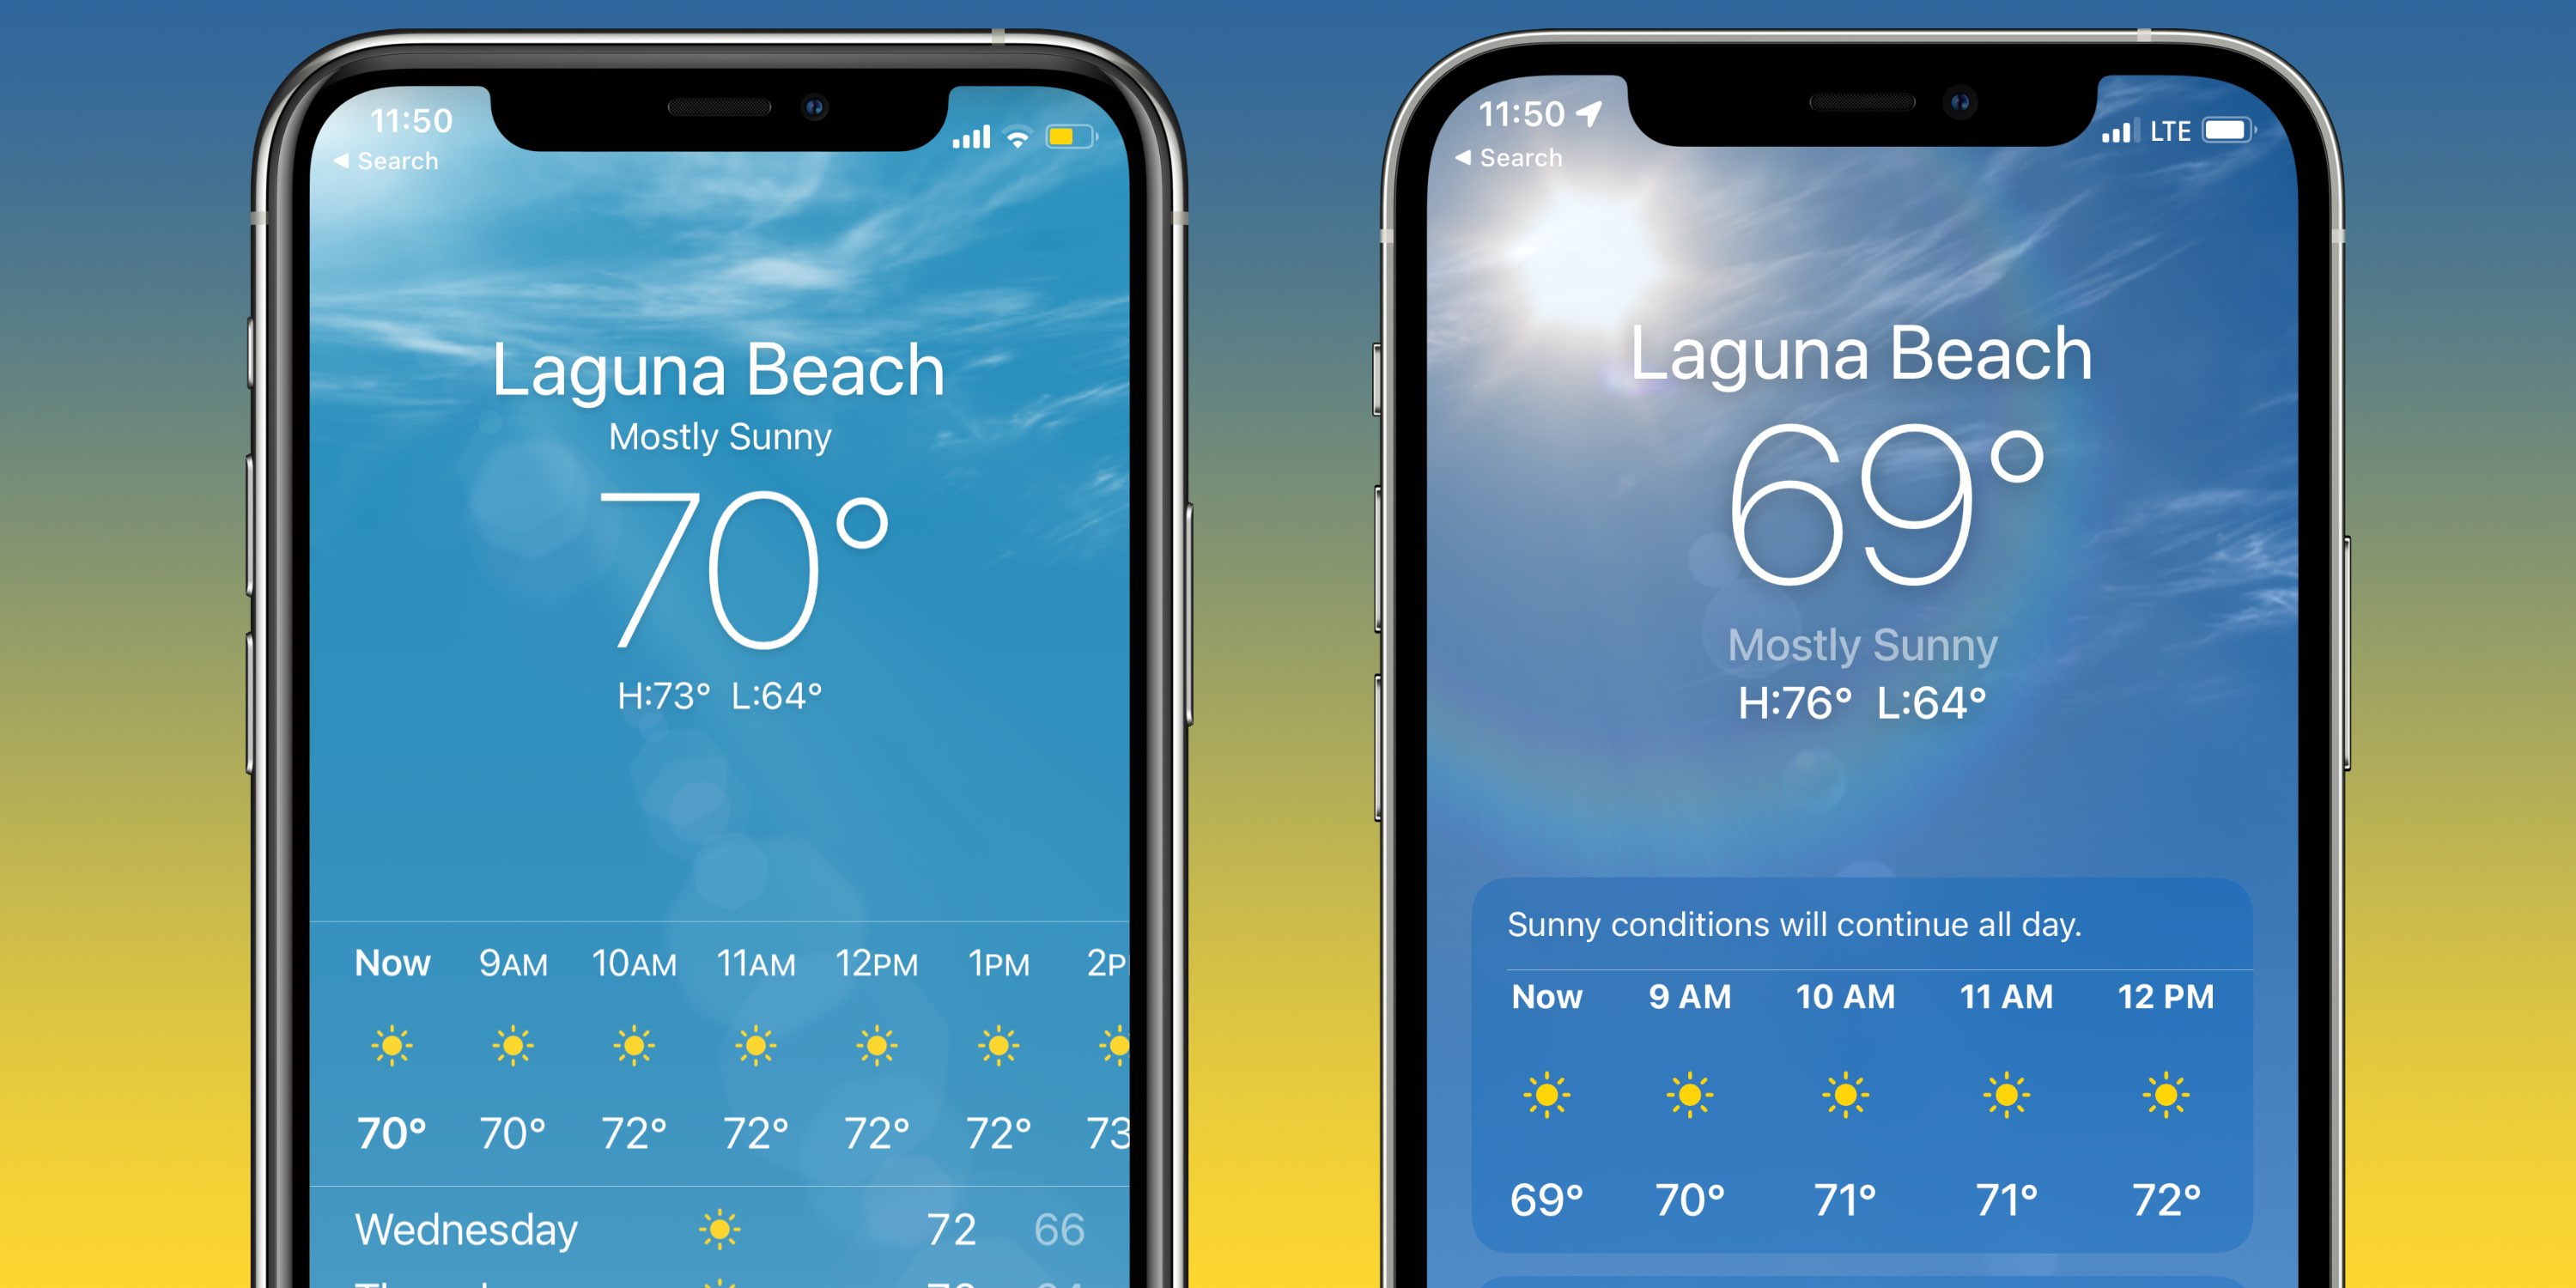 Here is why the iOS Weather app never shows 69-degree temperatures